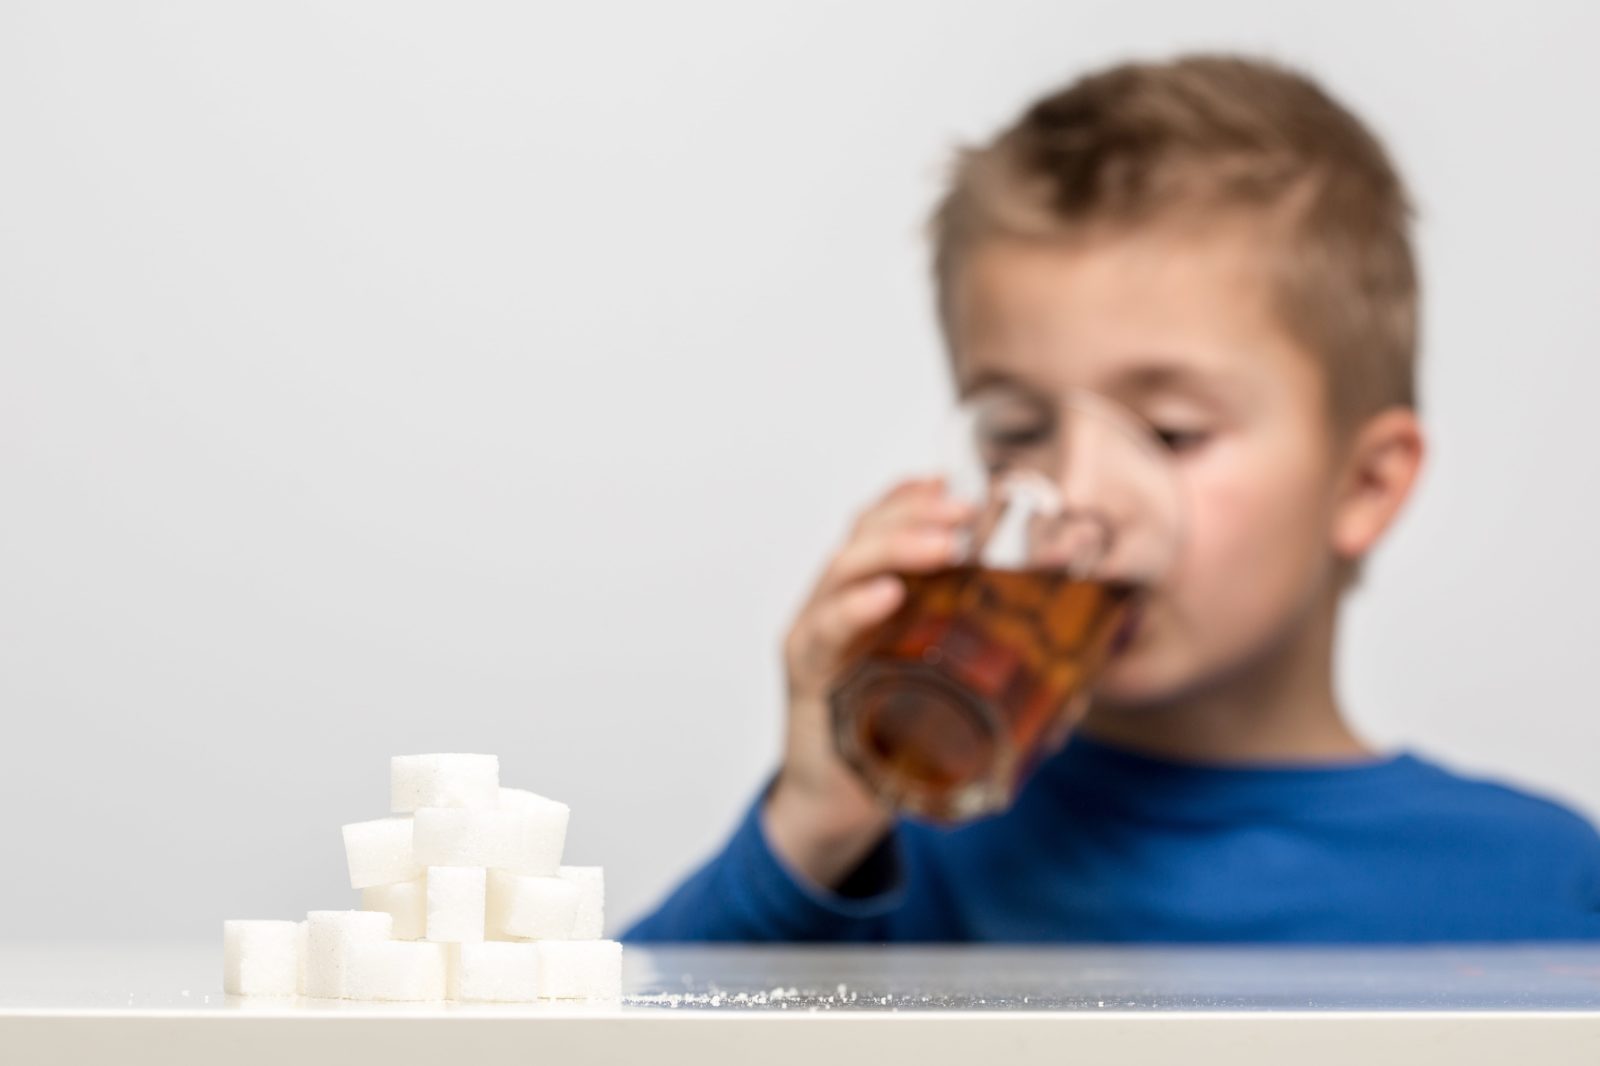 a pile of sugar cubes in focus with a blurred child drinking soda in the background